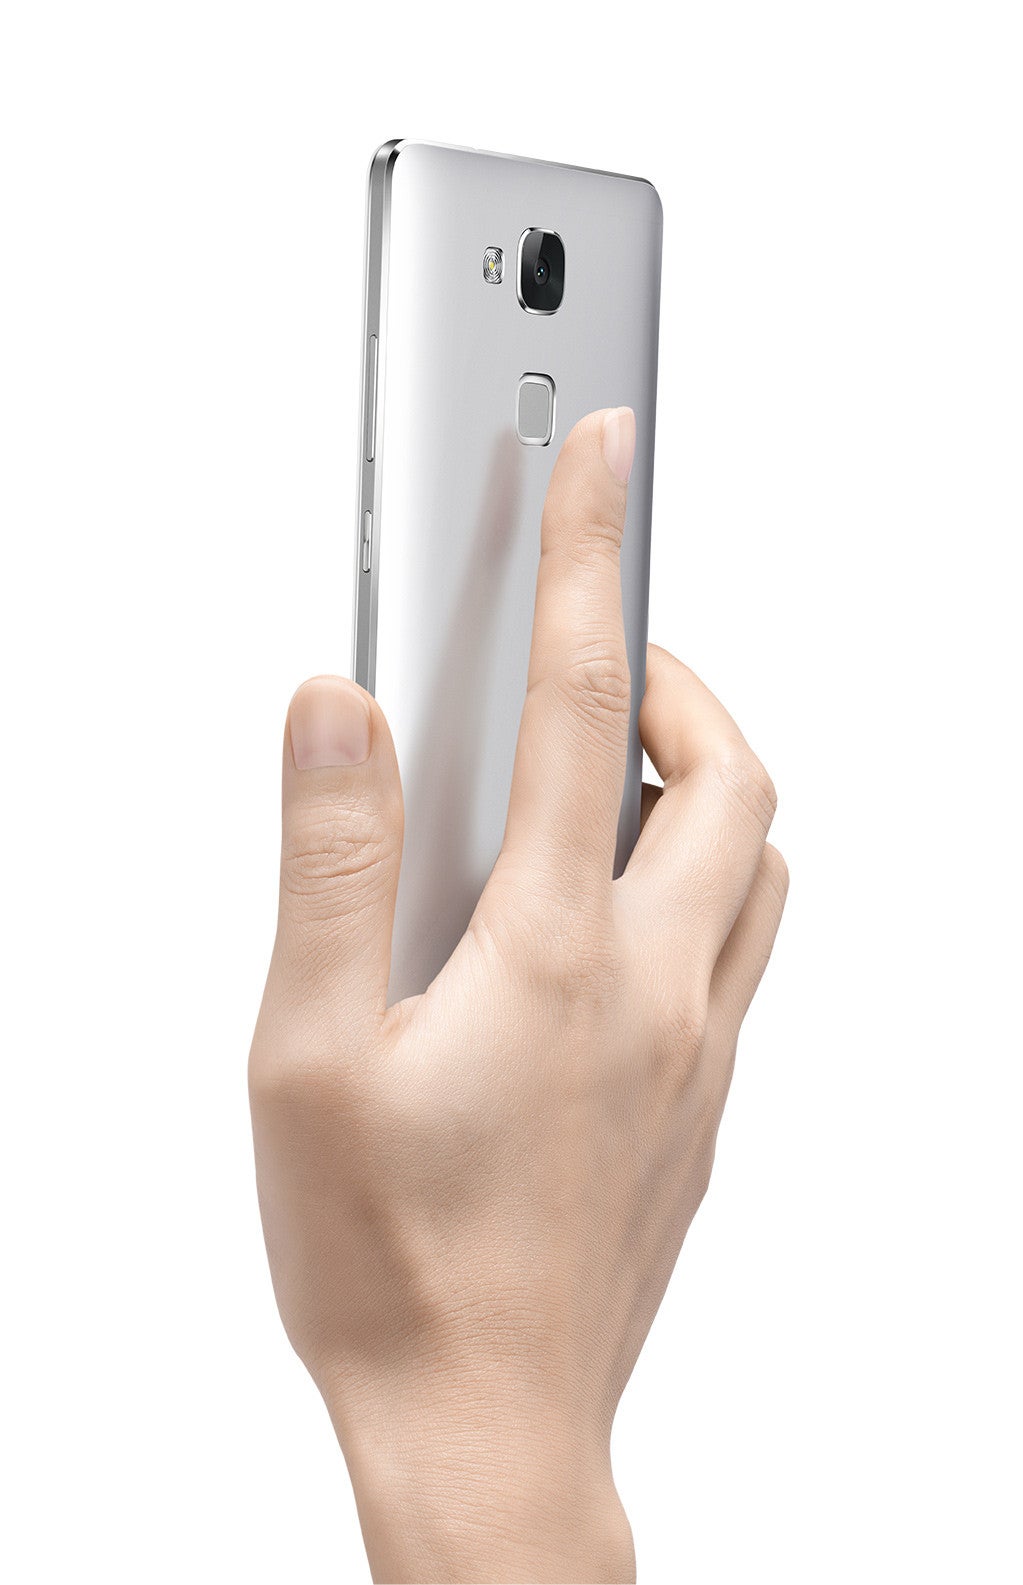 The Power of Your Fingerprint to Change the World of Smartphones